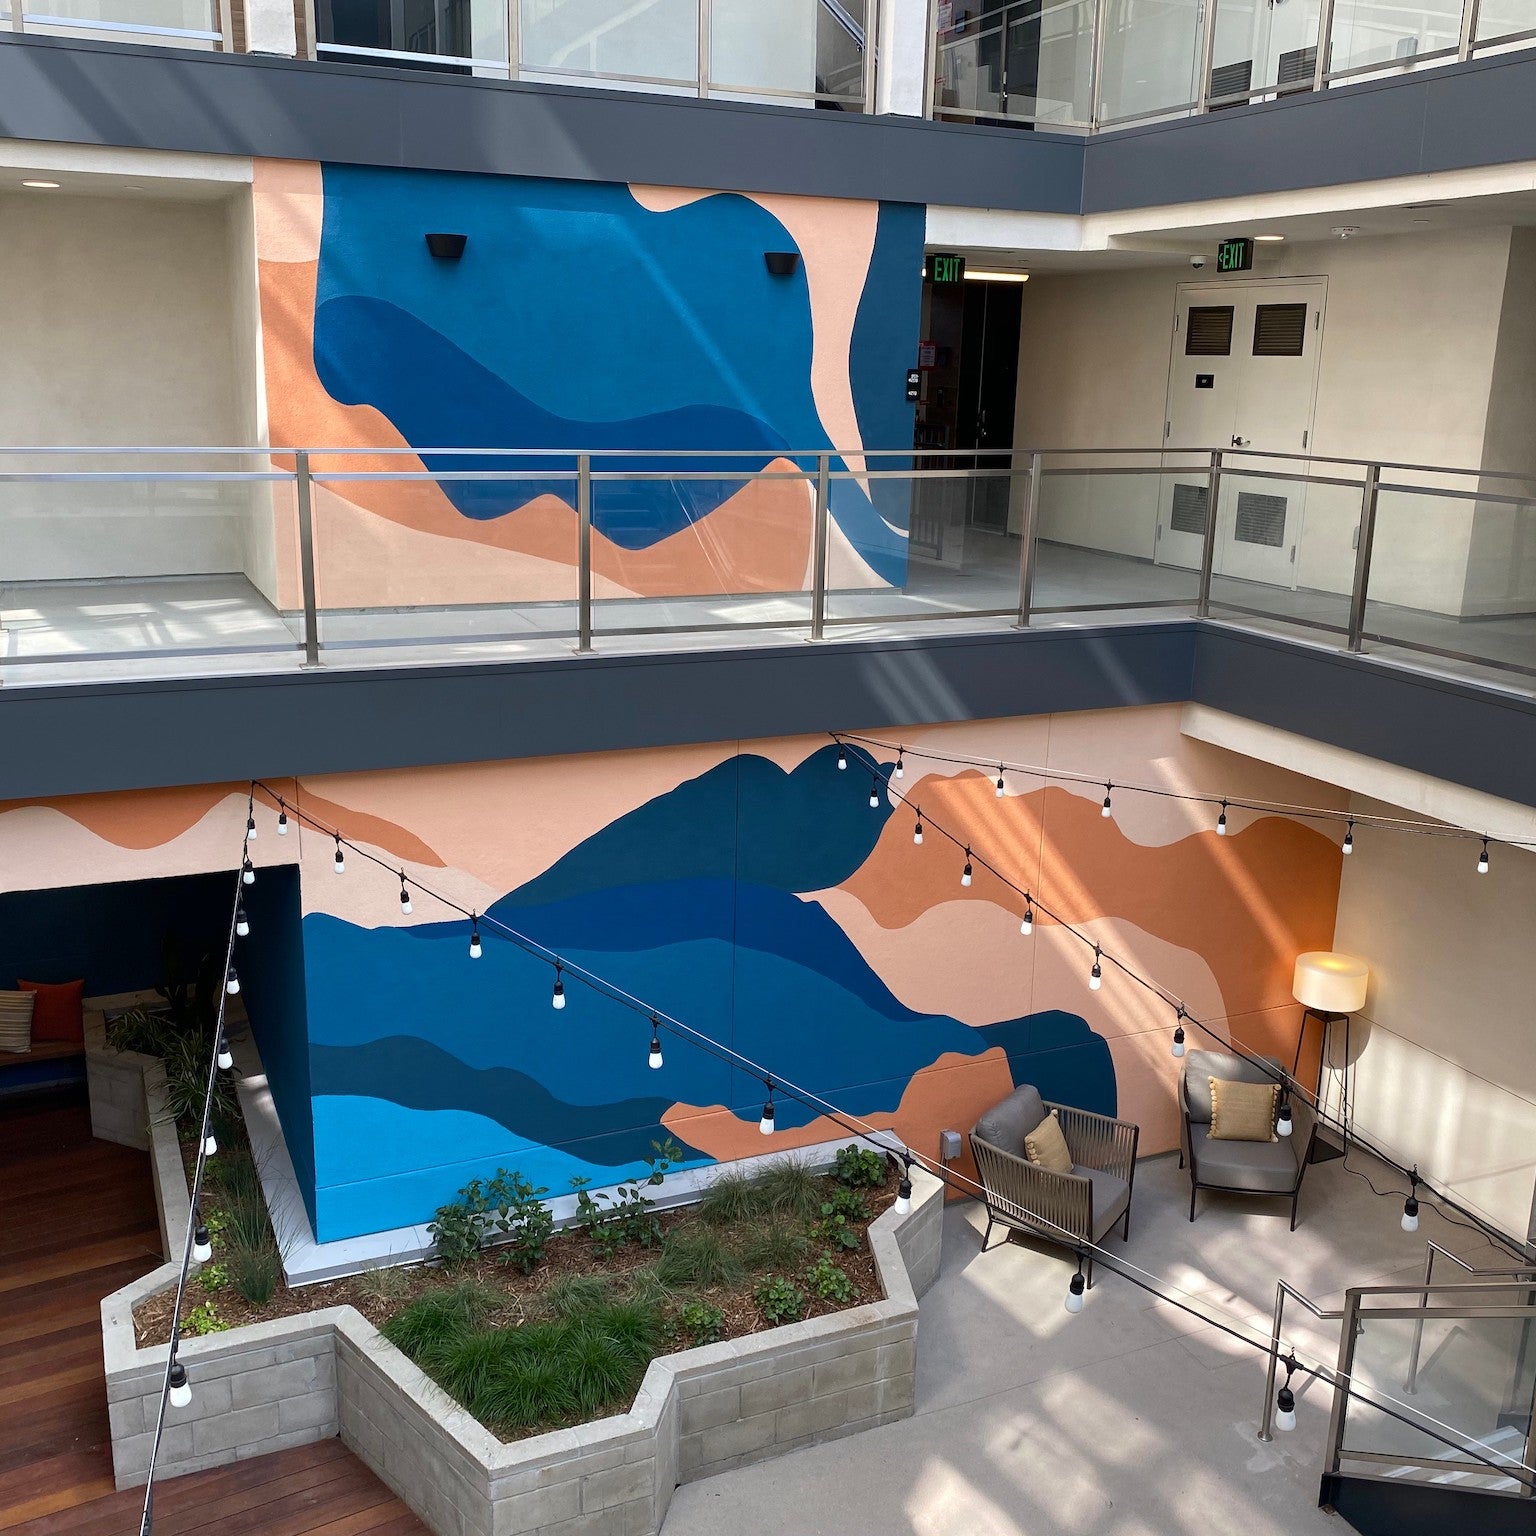 1641 Lincoln Apartments featuring an expansive, two-story hand-painted mural by WRAPPED Studio, with abstract oceanic shapes guiding tenants through the space.